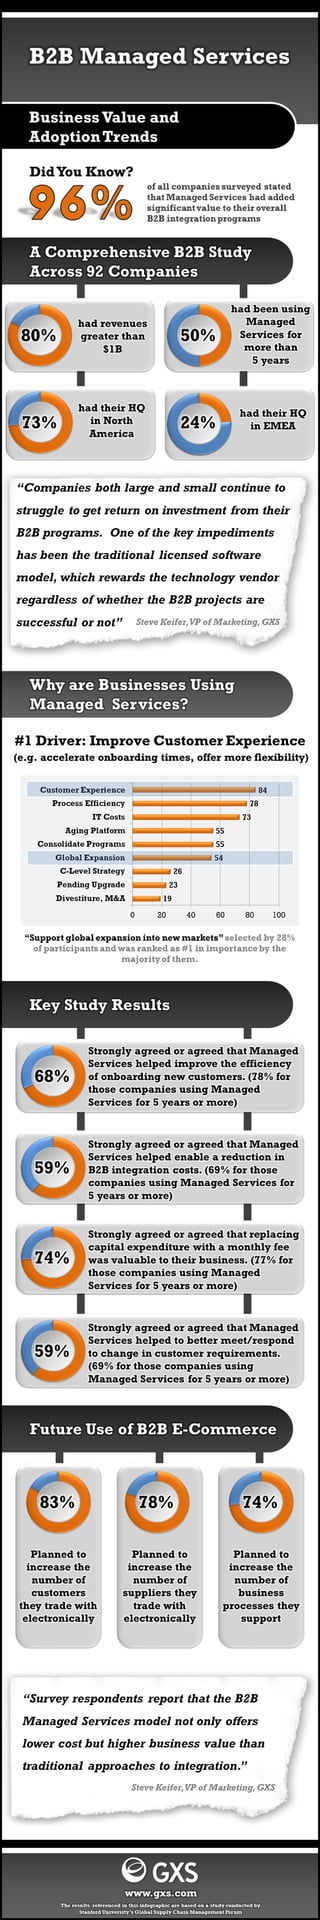 Stanford University B2B Managed Services Infographic - May 2013